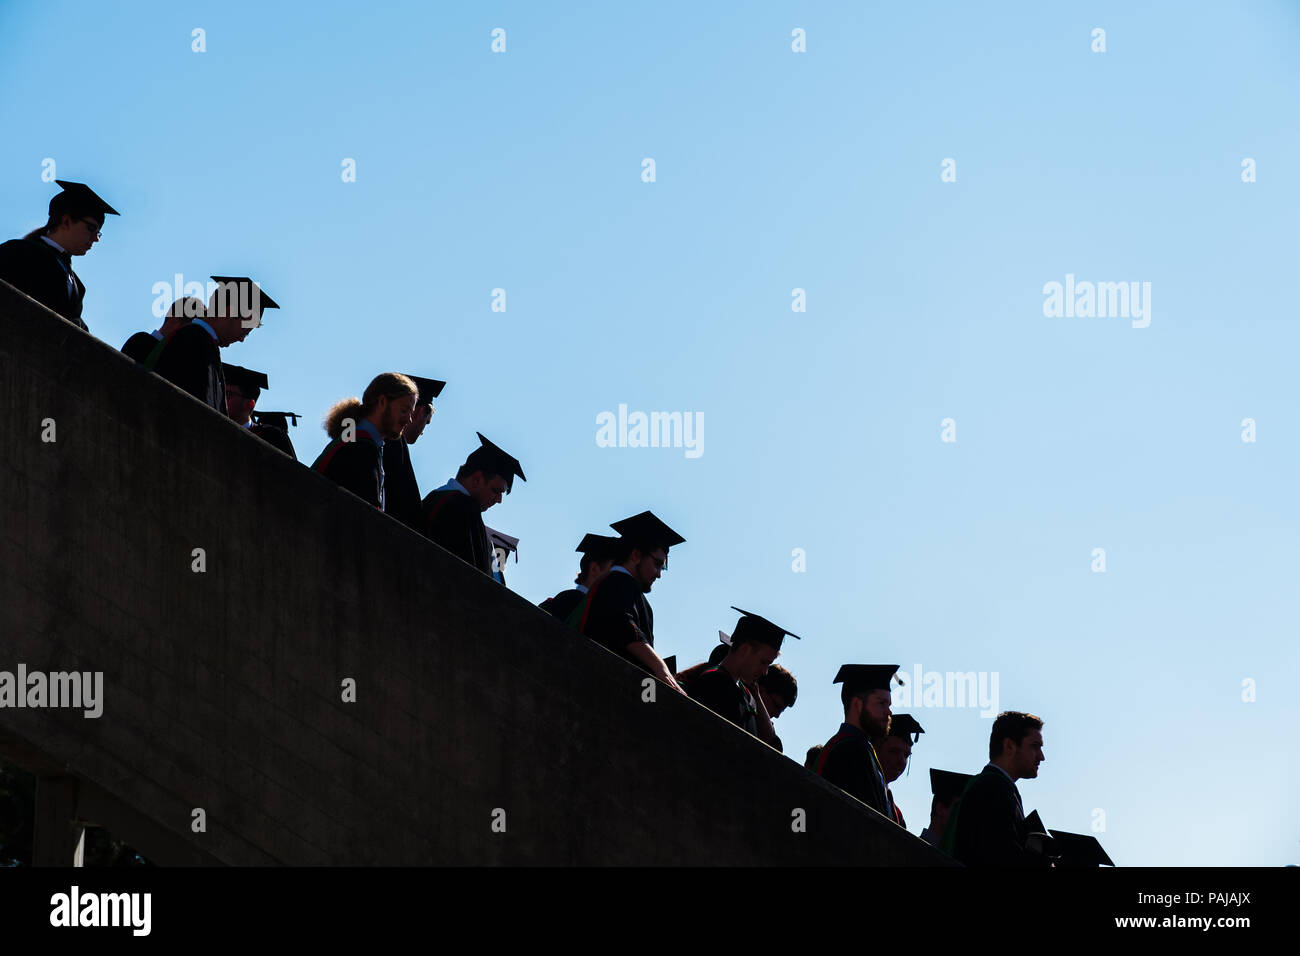 Higher Education in the UK: Students graduating from Aberystwyth university, in their traditional mortar boards and black academic gowns.  Silhouetted against a blue sky. July 2018 Stock Photo